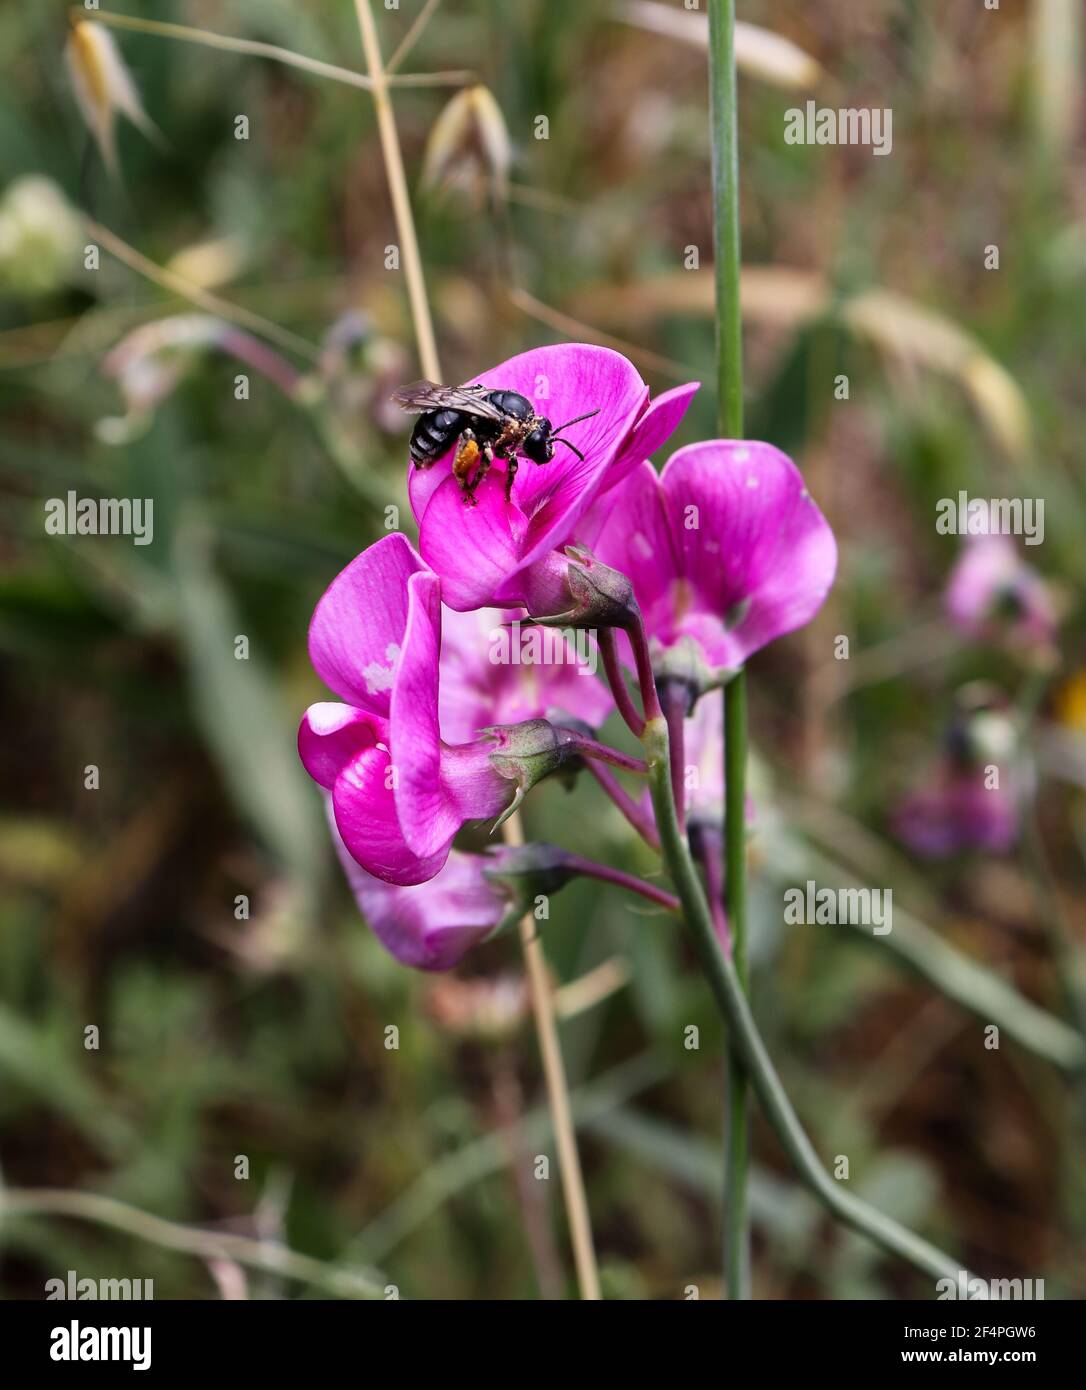 Honey bee with the corbicula full of pollen, pollinating a pink flower. Stock Photo